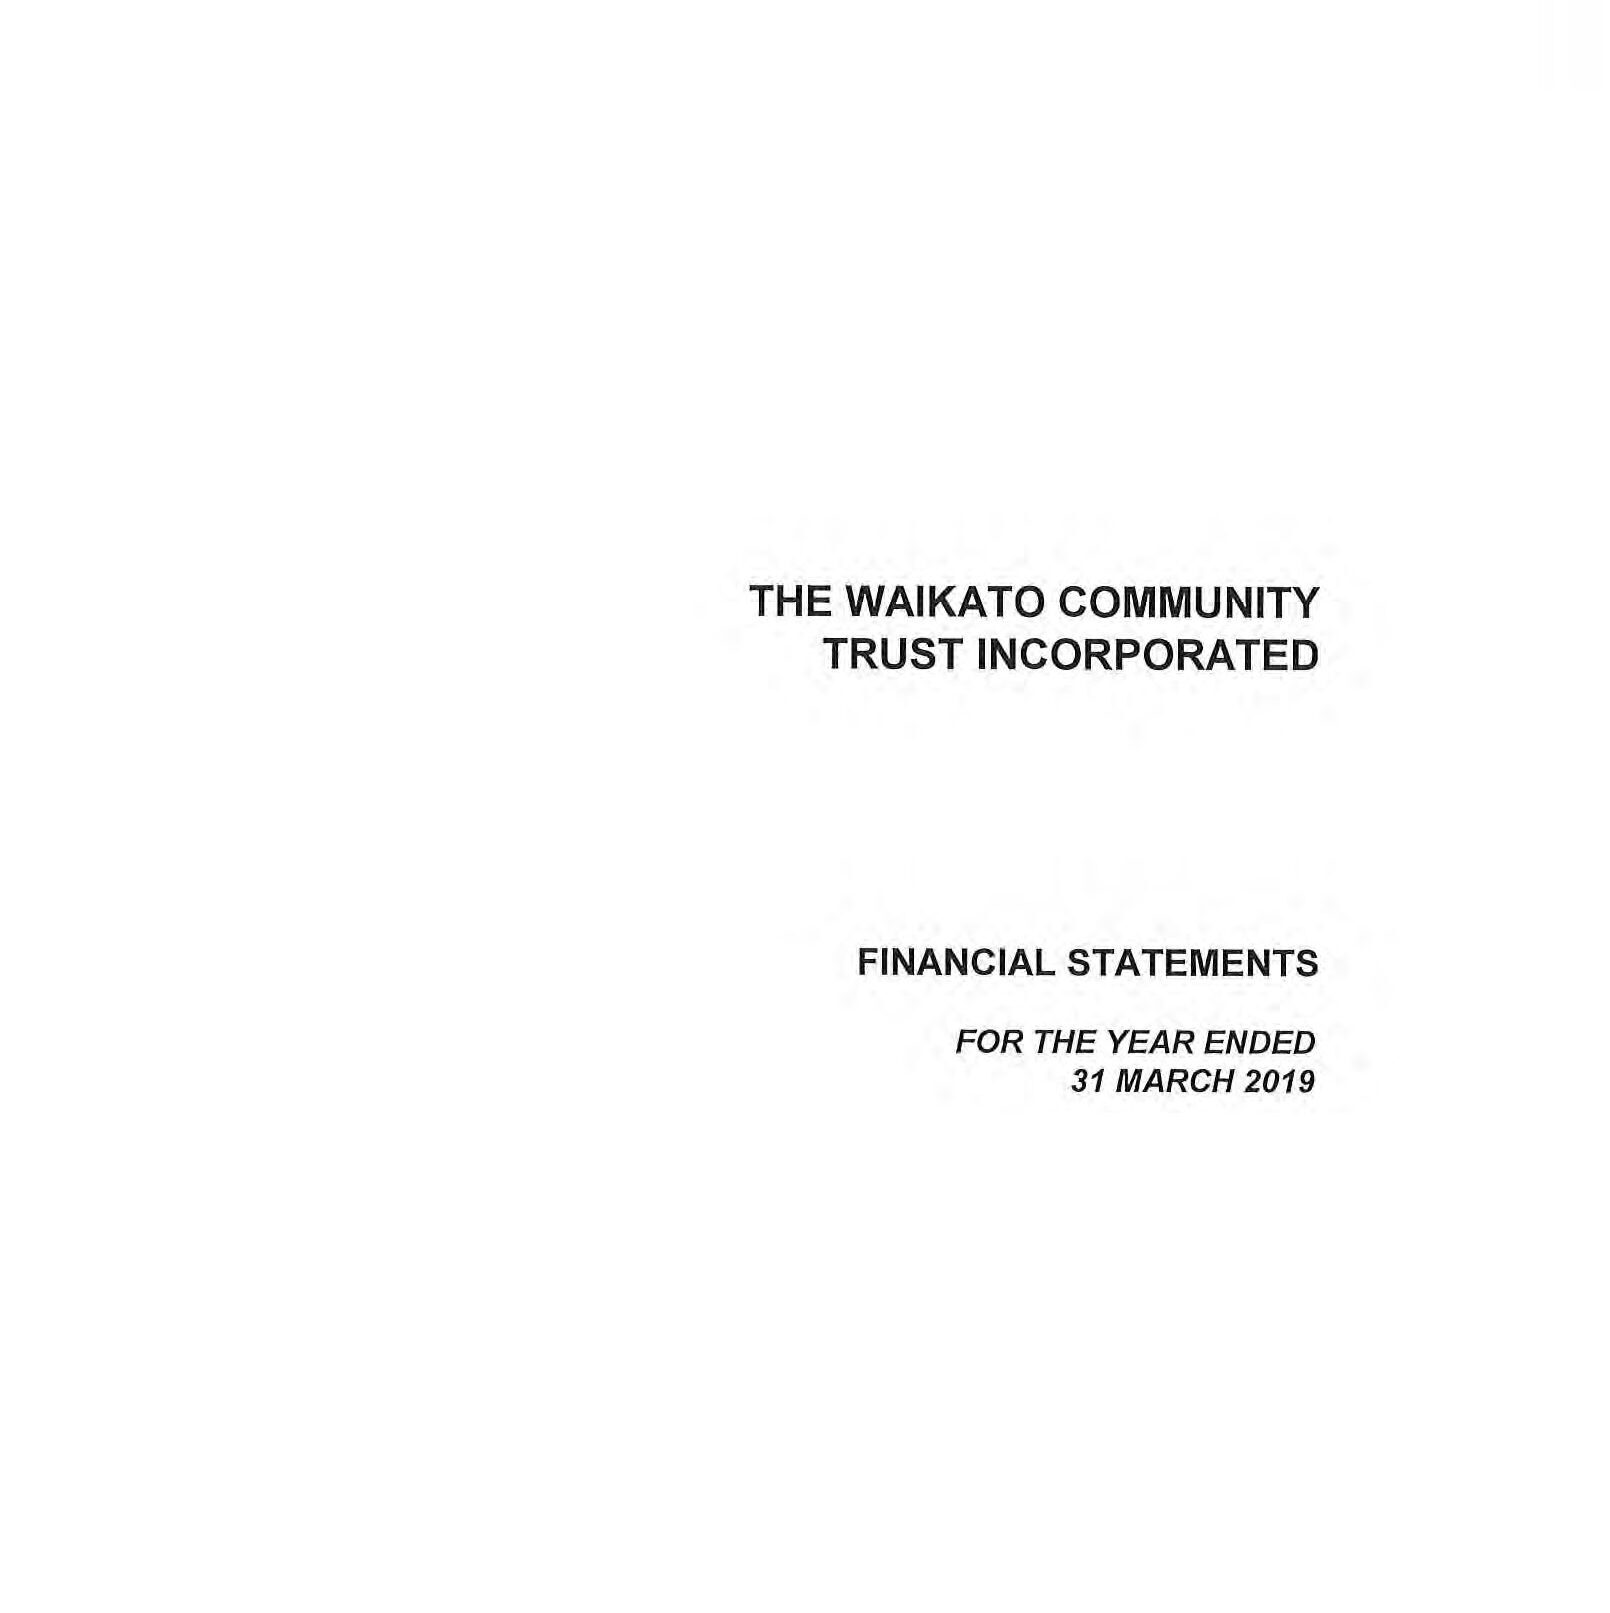 The Waikato Community Trust Incorporated Financial Statements for the year ended 31 March 2019